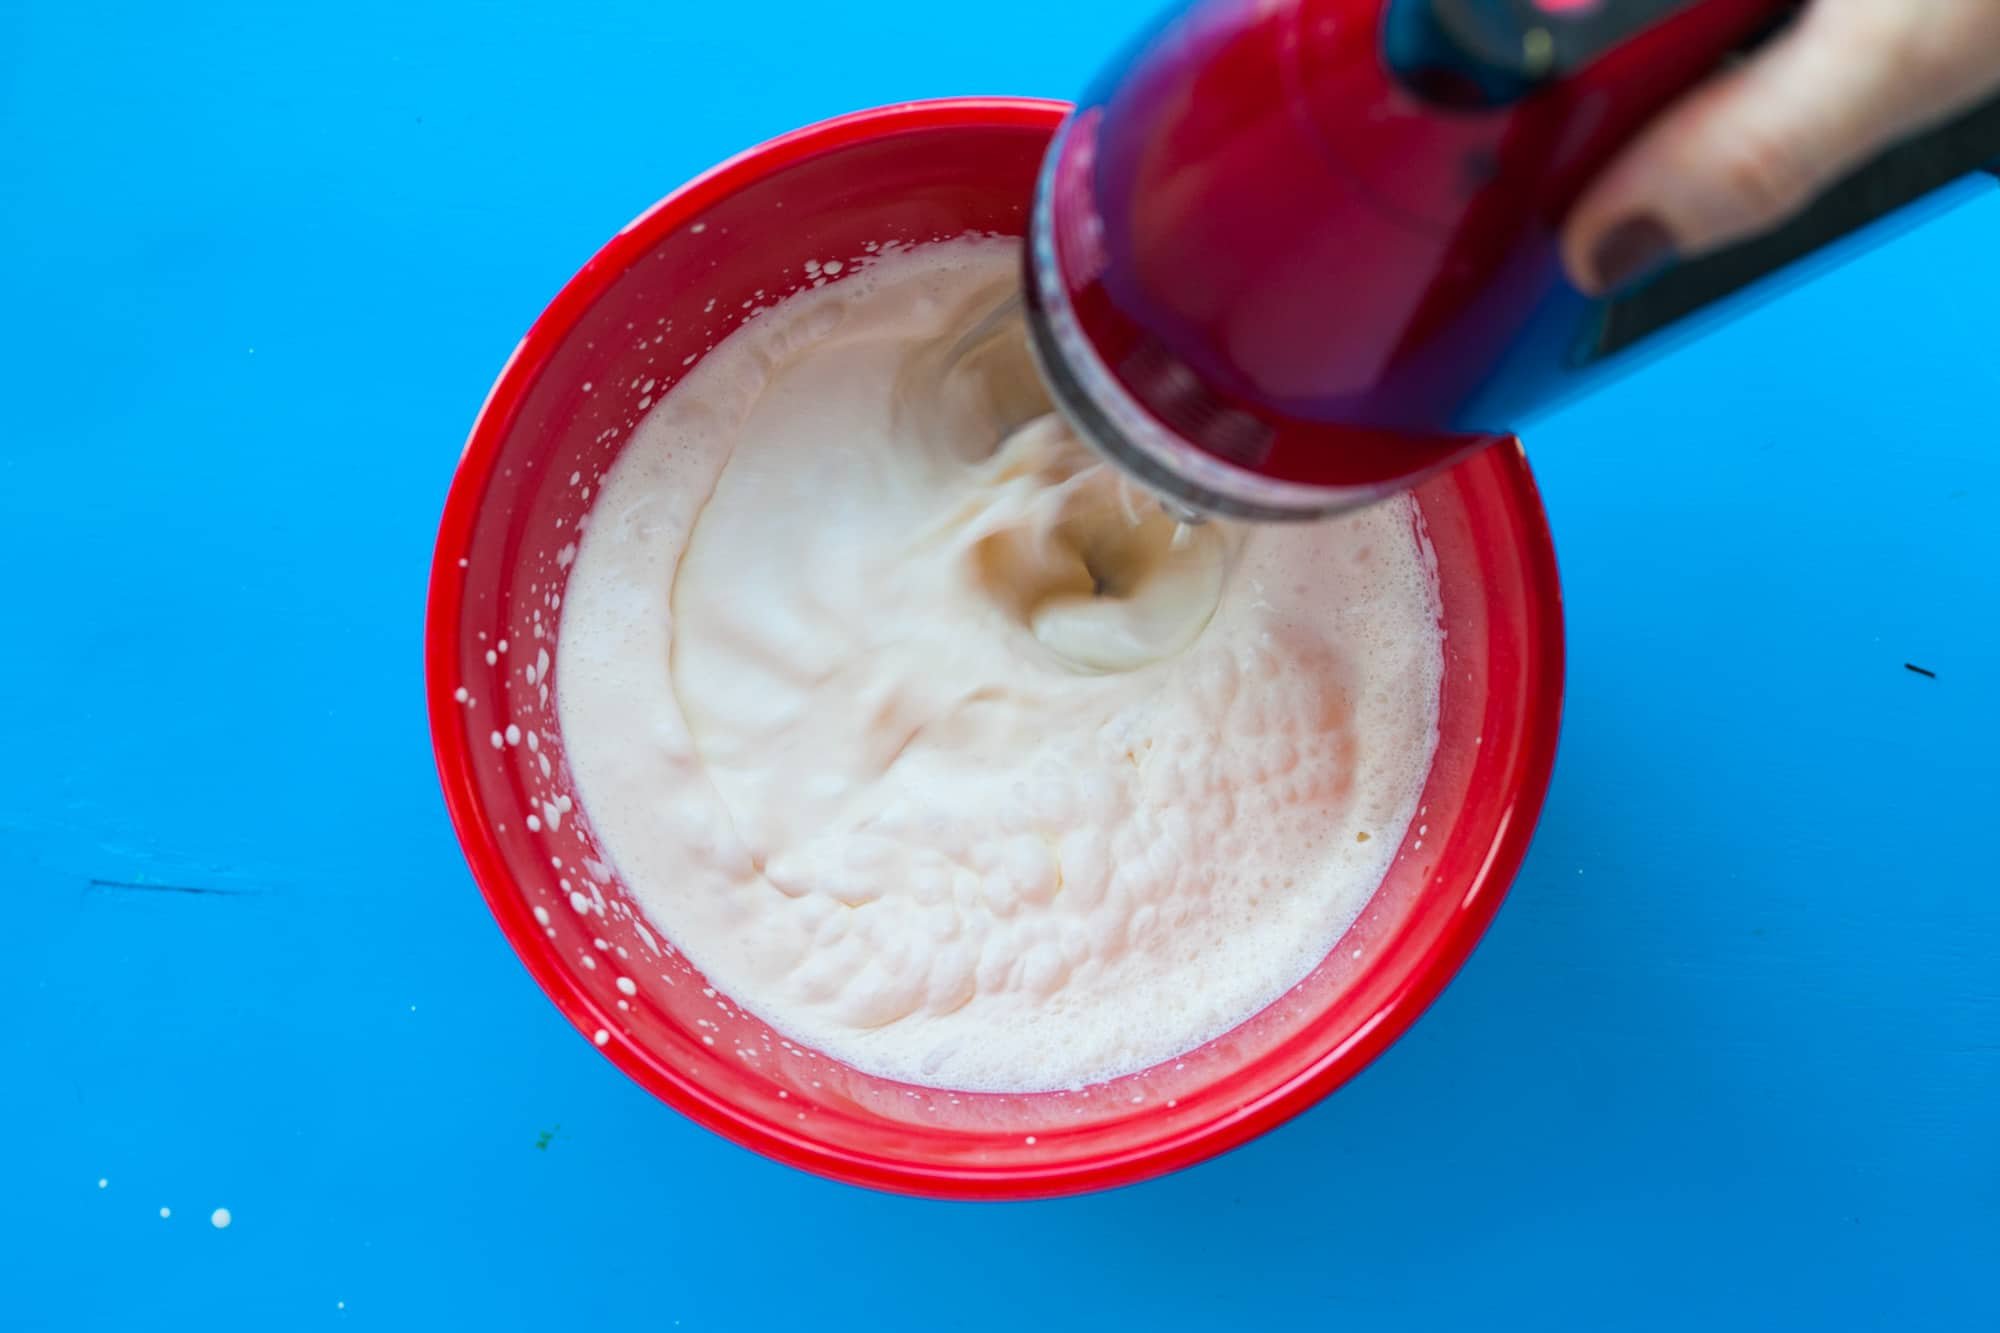 How to Make Perfect Whipped Cream / Carrie Crow / Katie Workman / themom100.com